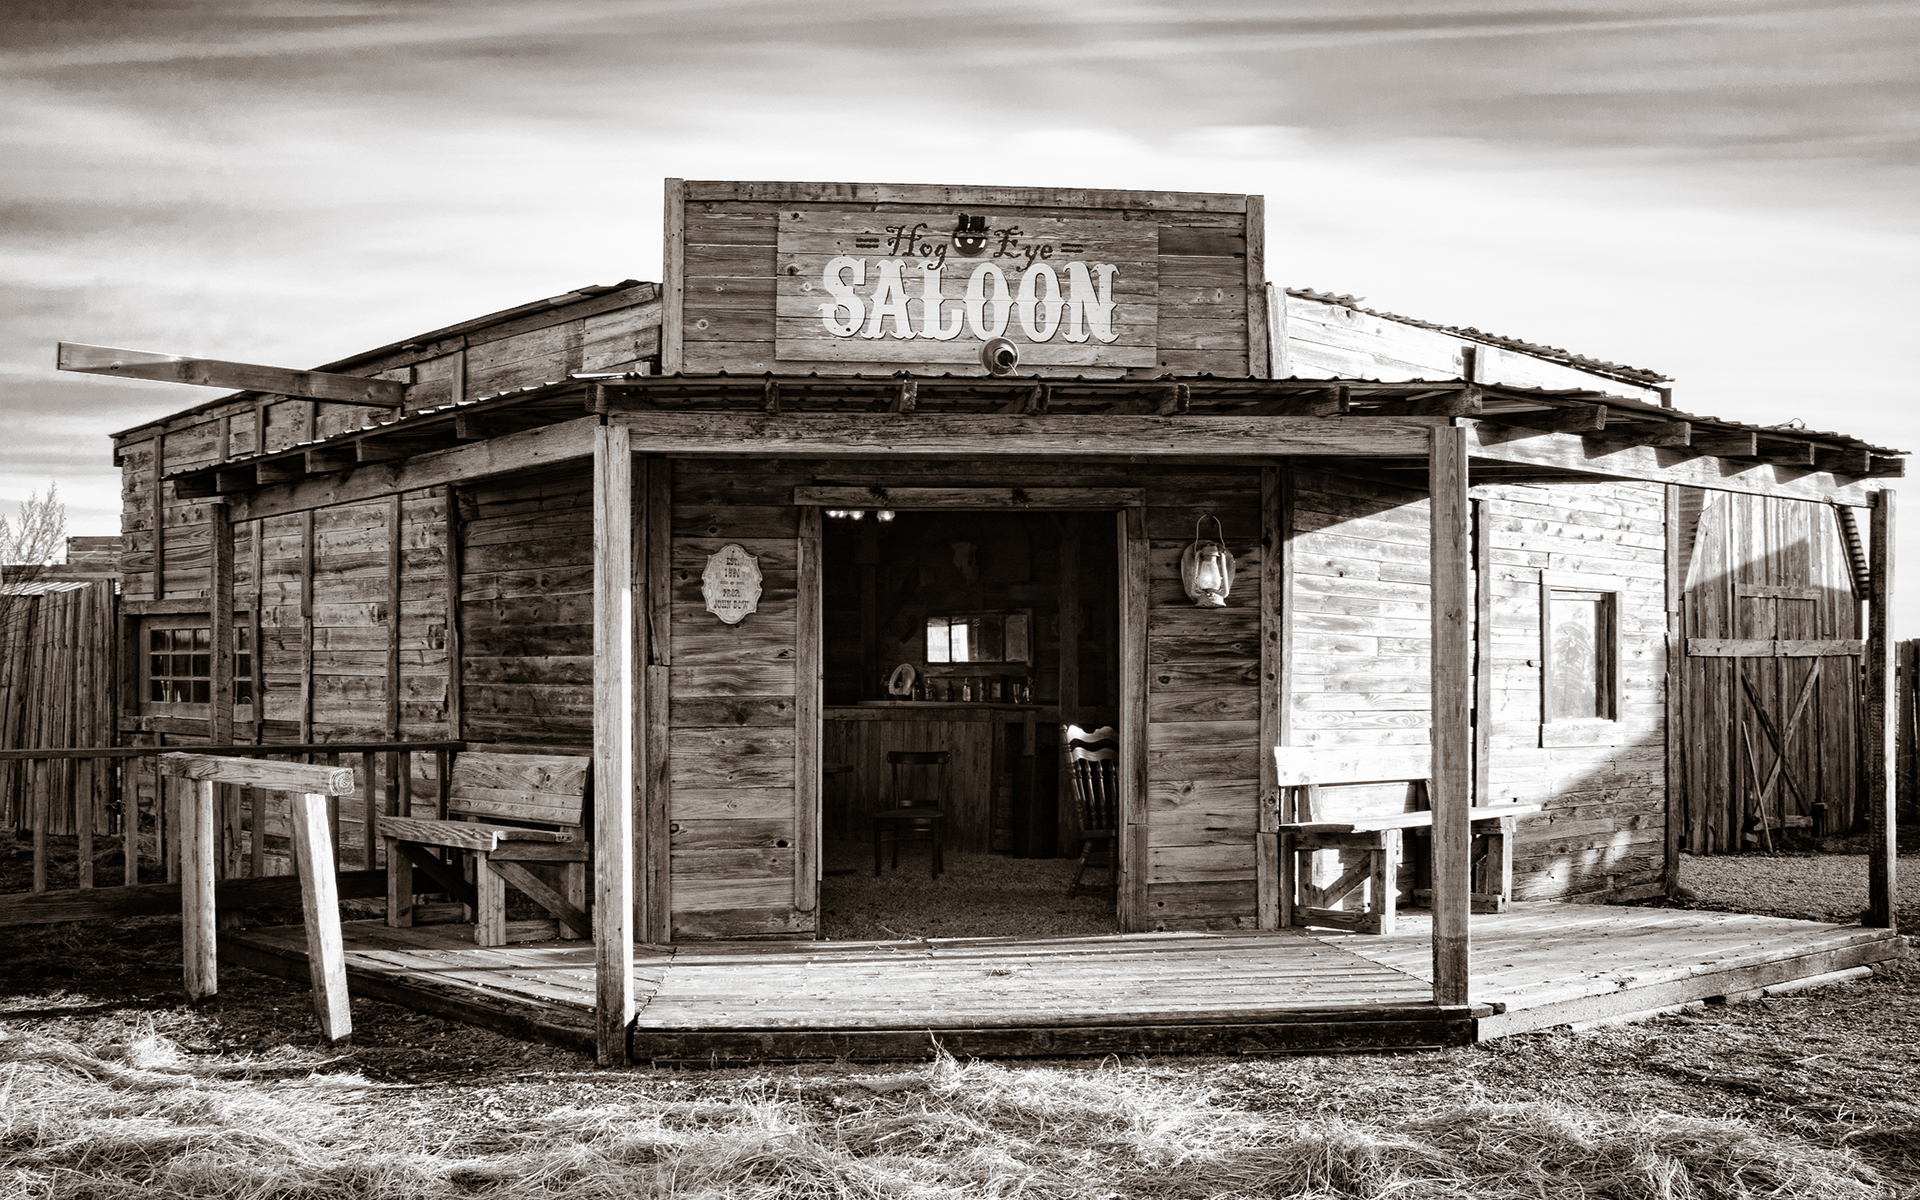 saloon, Bar, Wild, West, Sepia, American, Retro, World, History, Drinks, Architecture, Buildings, Black, White, Bw Wallpaper